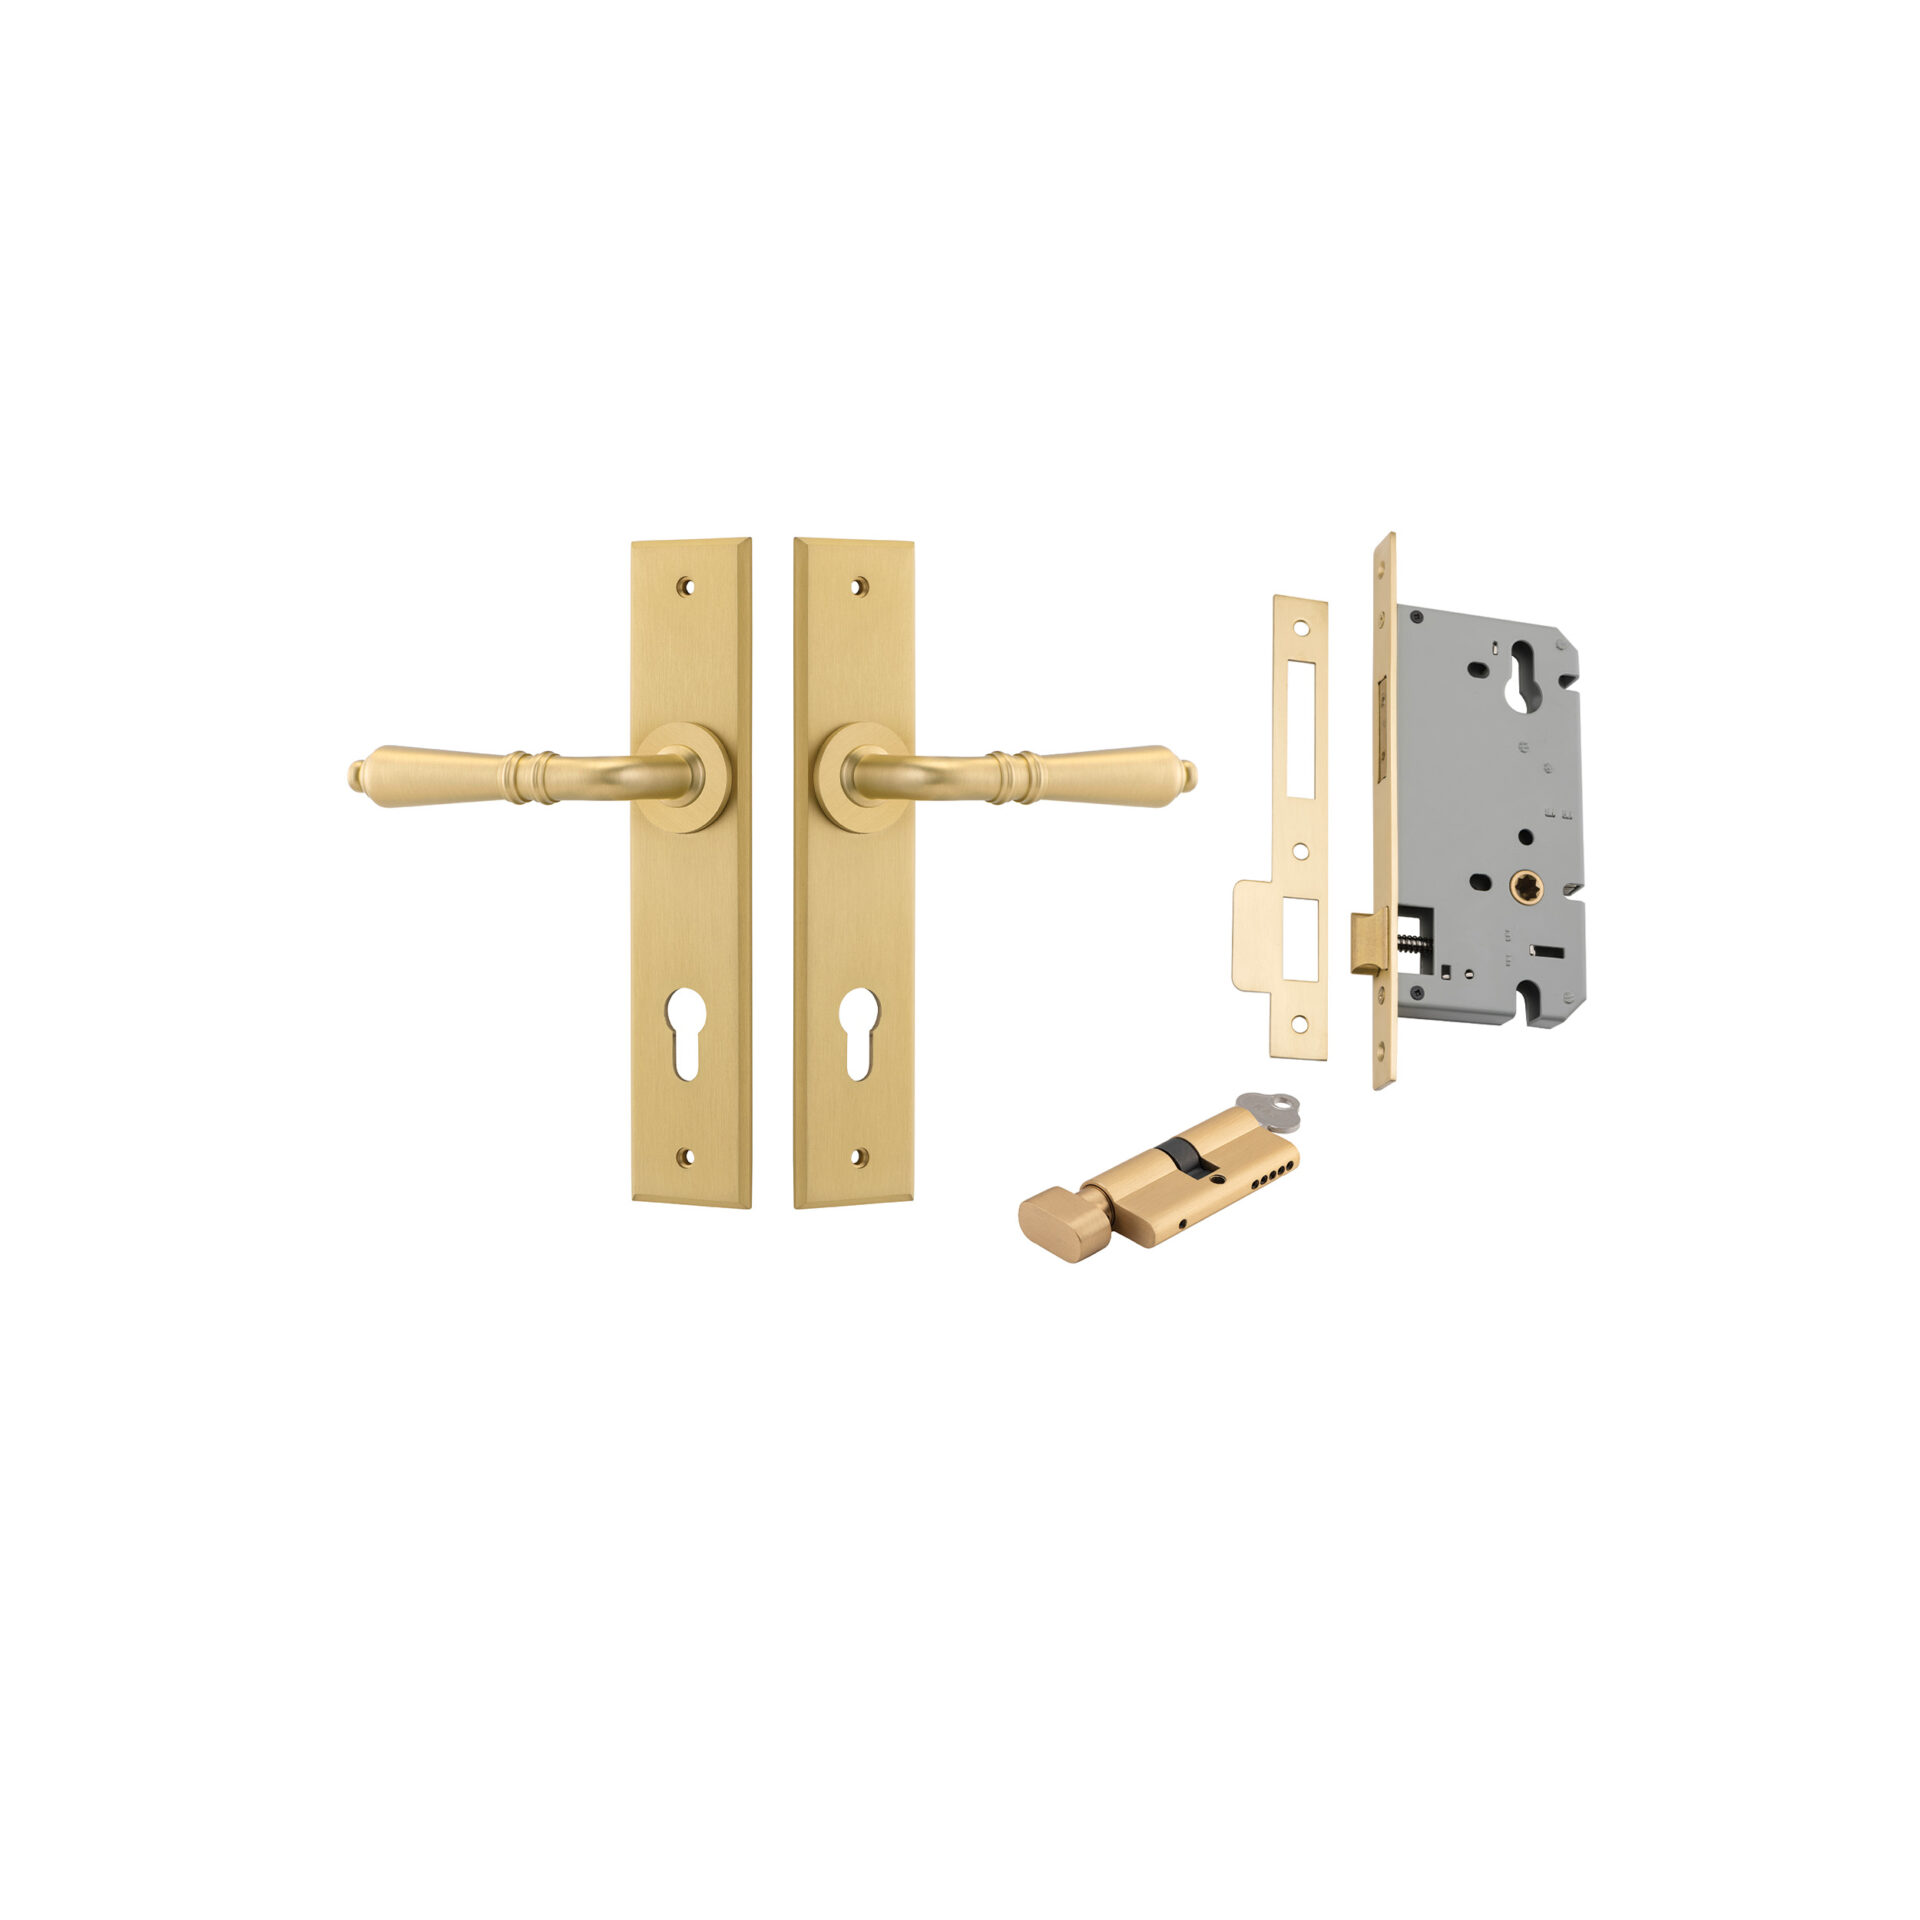 16214KENTR60KT - Sarlat Lever - Chamfered Backplate Entrance Kit with High Security Lock - Brushed Gold PVD - Entrance